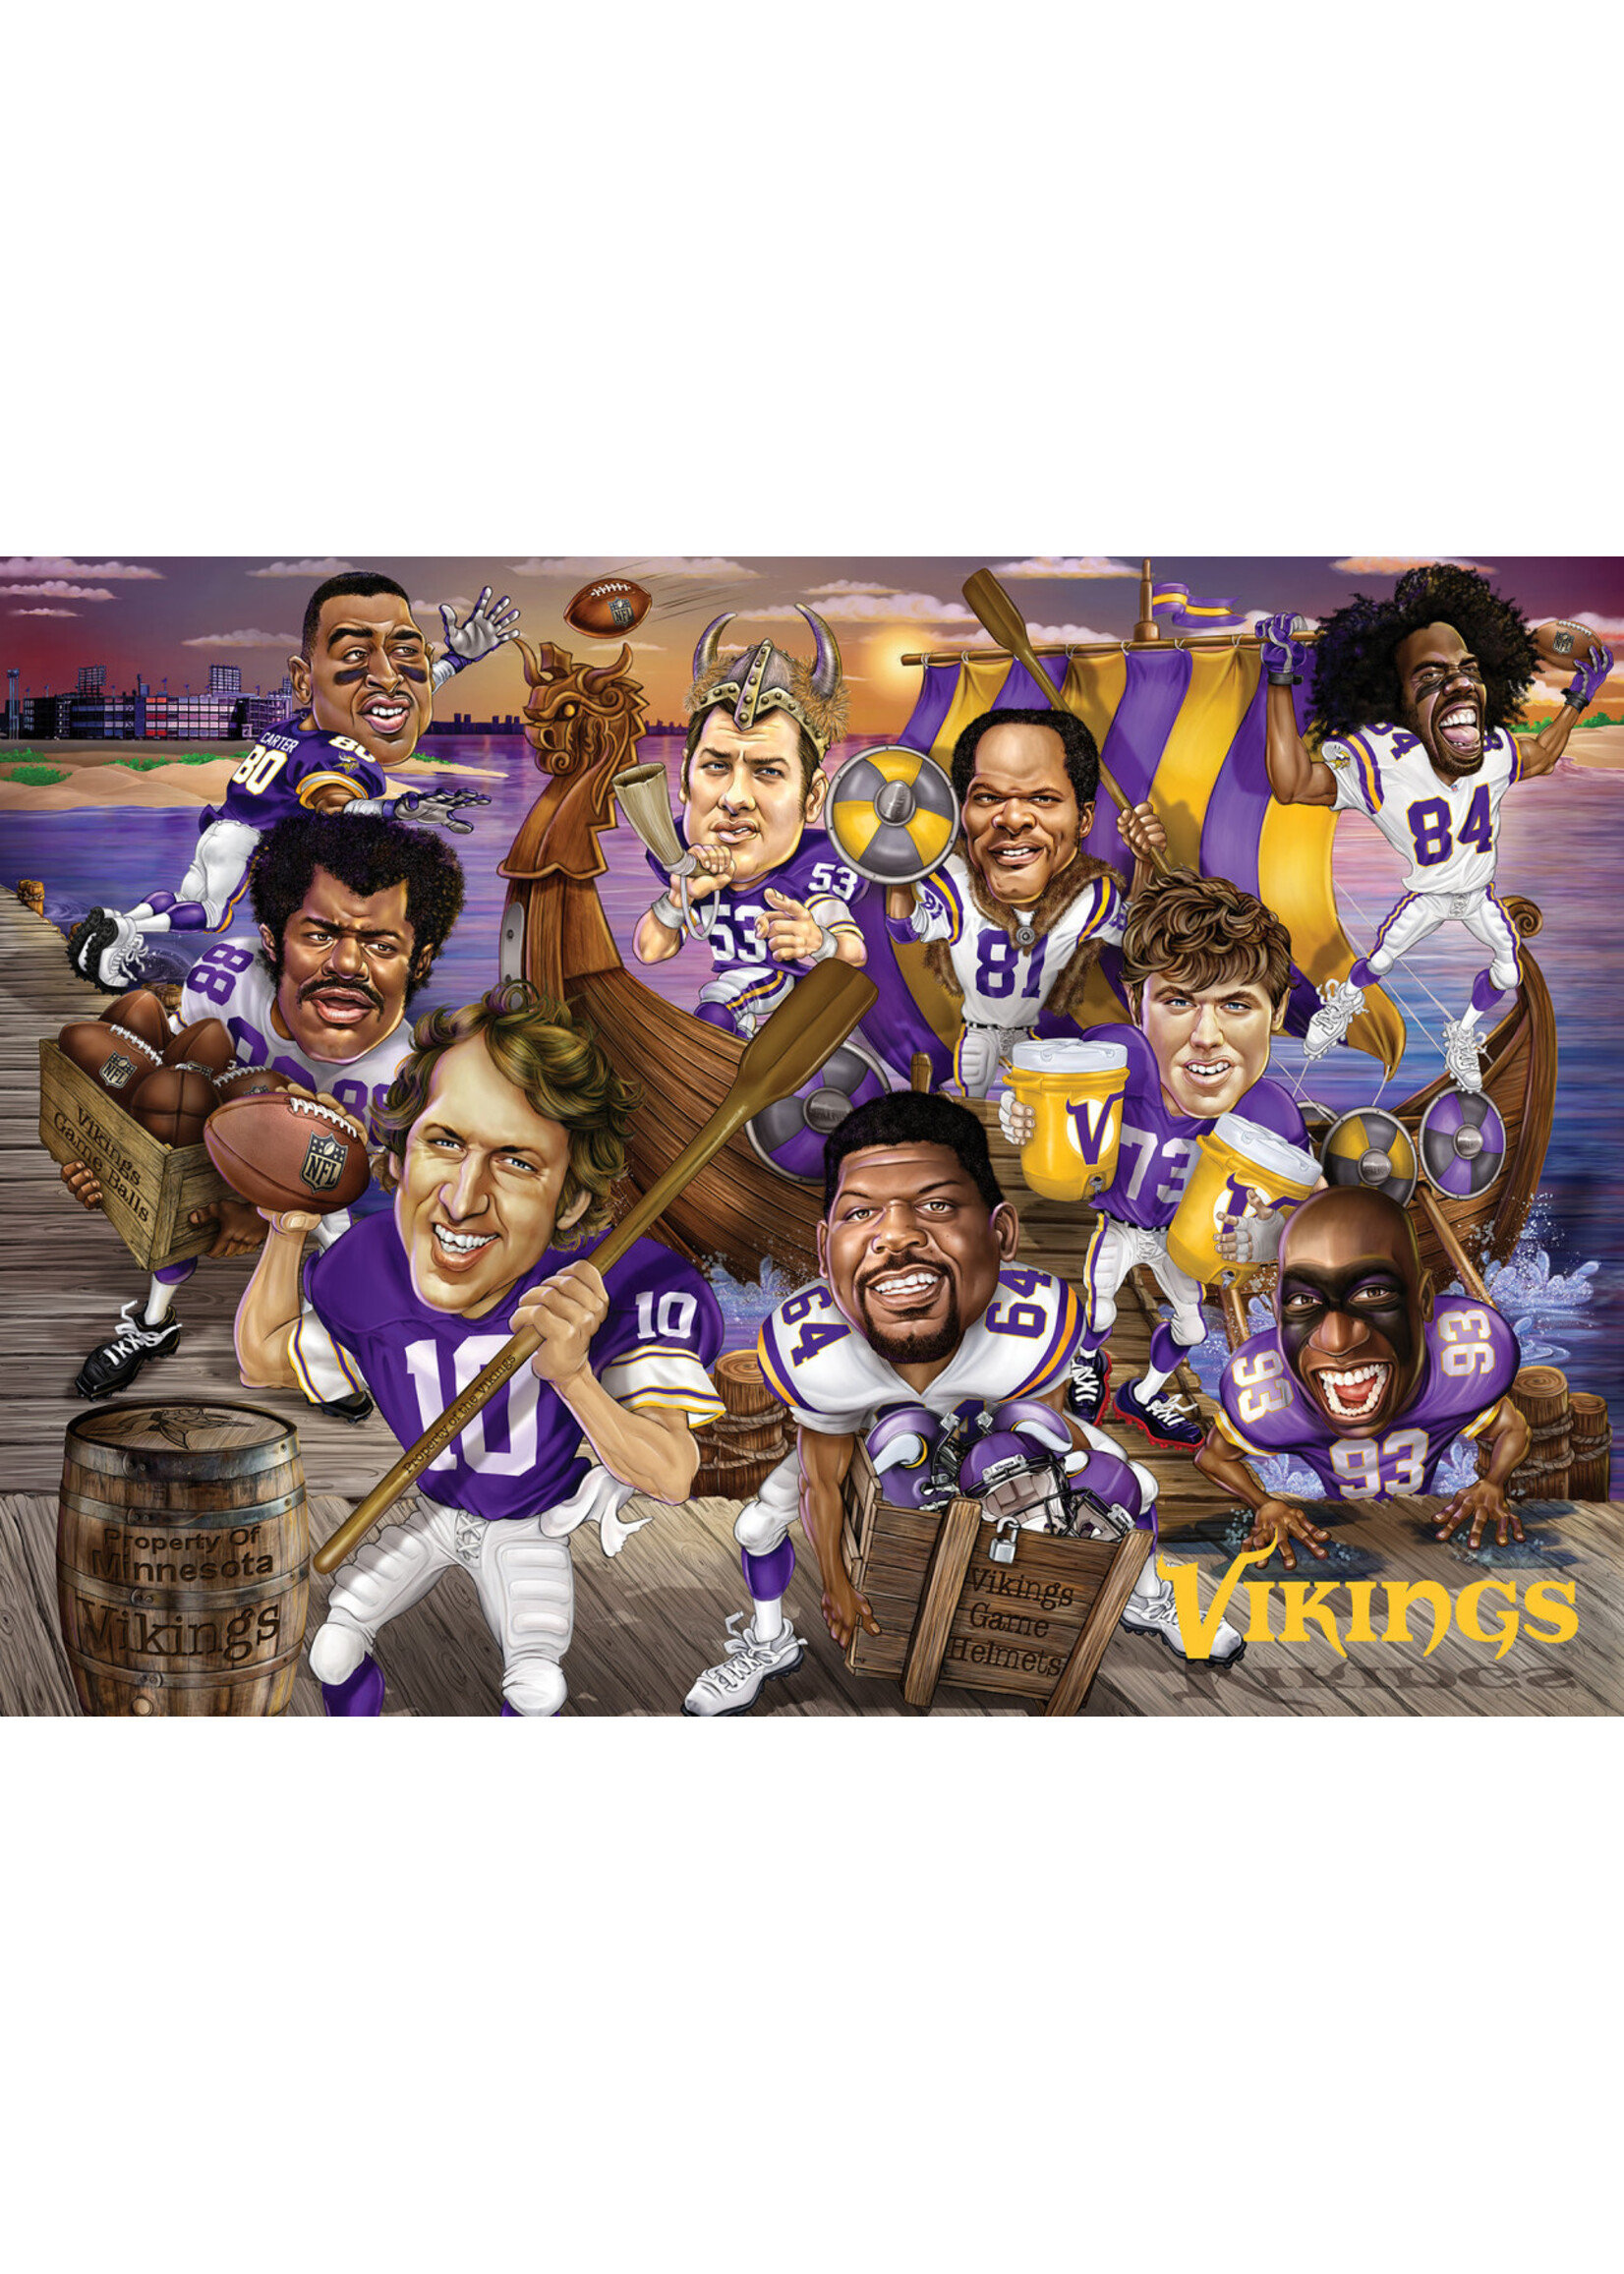 Masterpiece Puzzles Vikings All-Time Greats - 500 Piece Puzzle